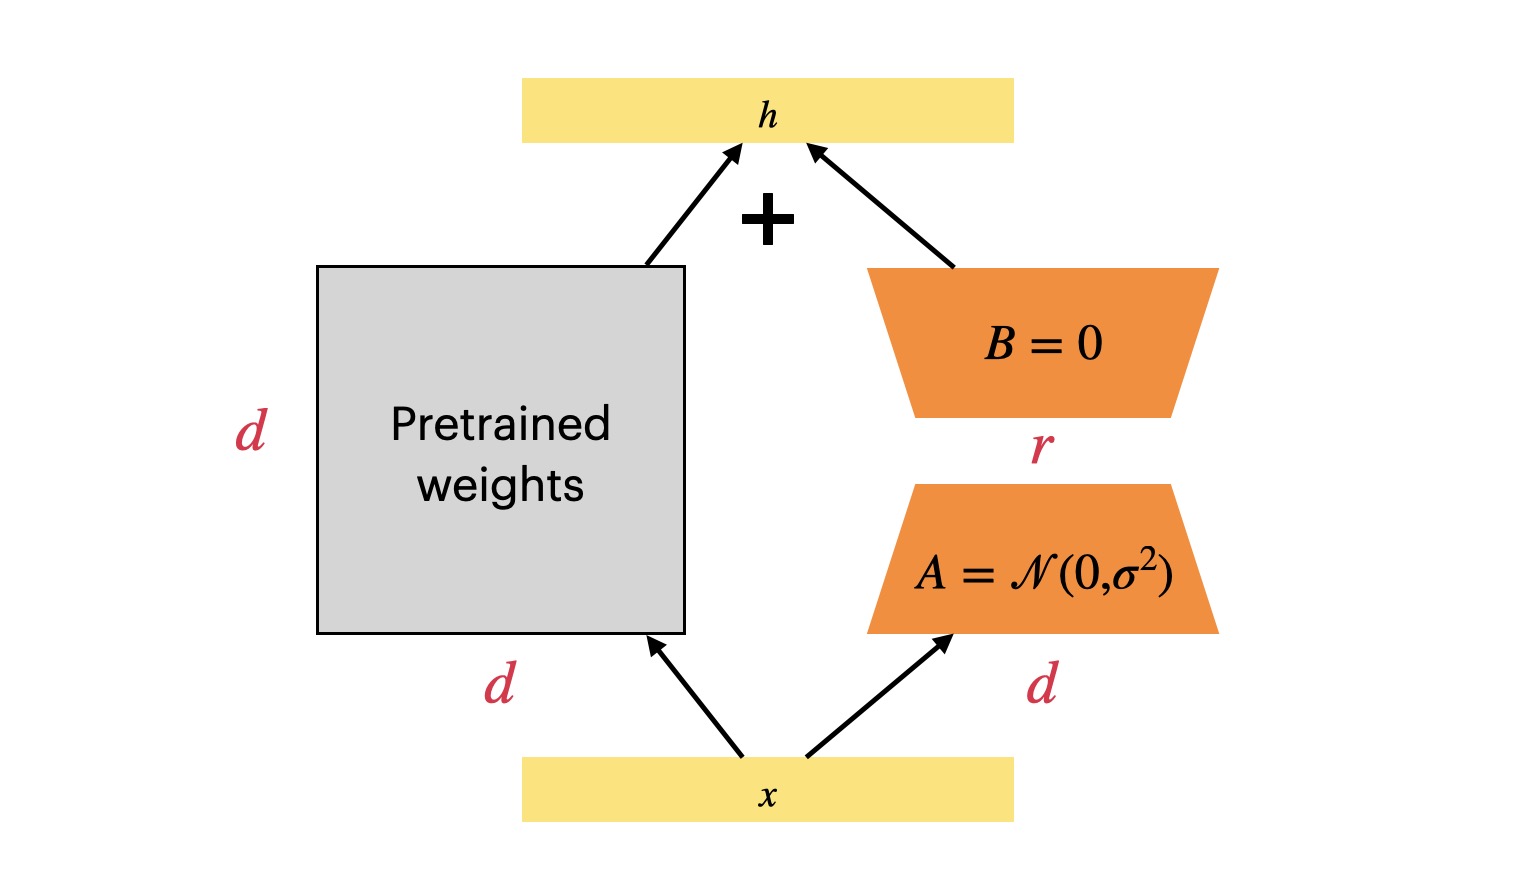 High level diagram of LoRA in an LLM context. Where: “Pretrained Weights” are the weights (information) previously learned by the base model. A and B are matrices that need to be updated (new or specialized  information) via fine-tuning. To run the fine-tuned model we combine the pre-trained weights and B, A to produce an output. Source:  https://martinlwx.github.io/en/lora-finetuning/